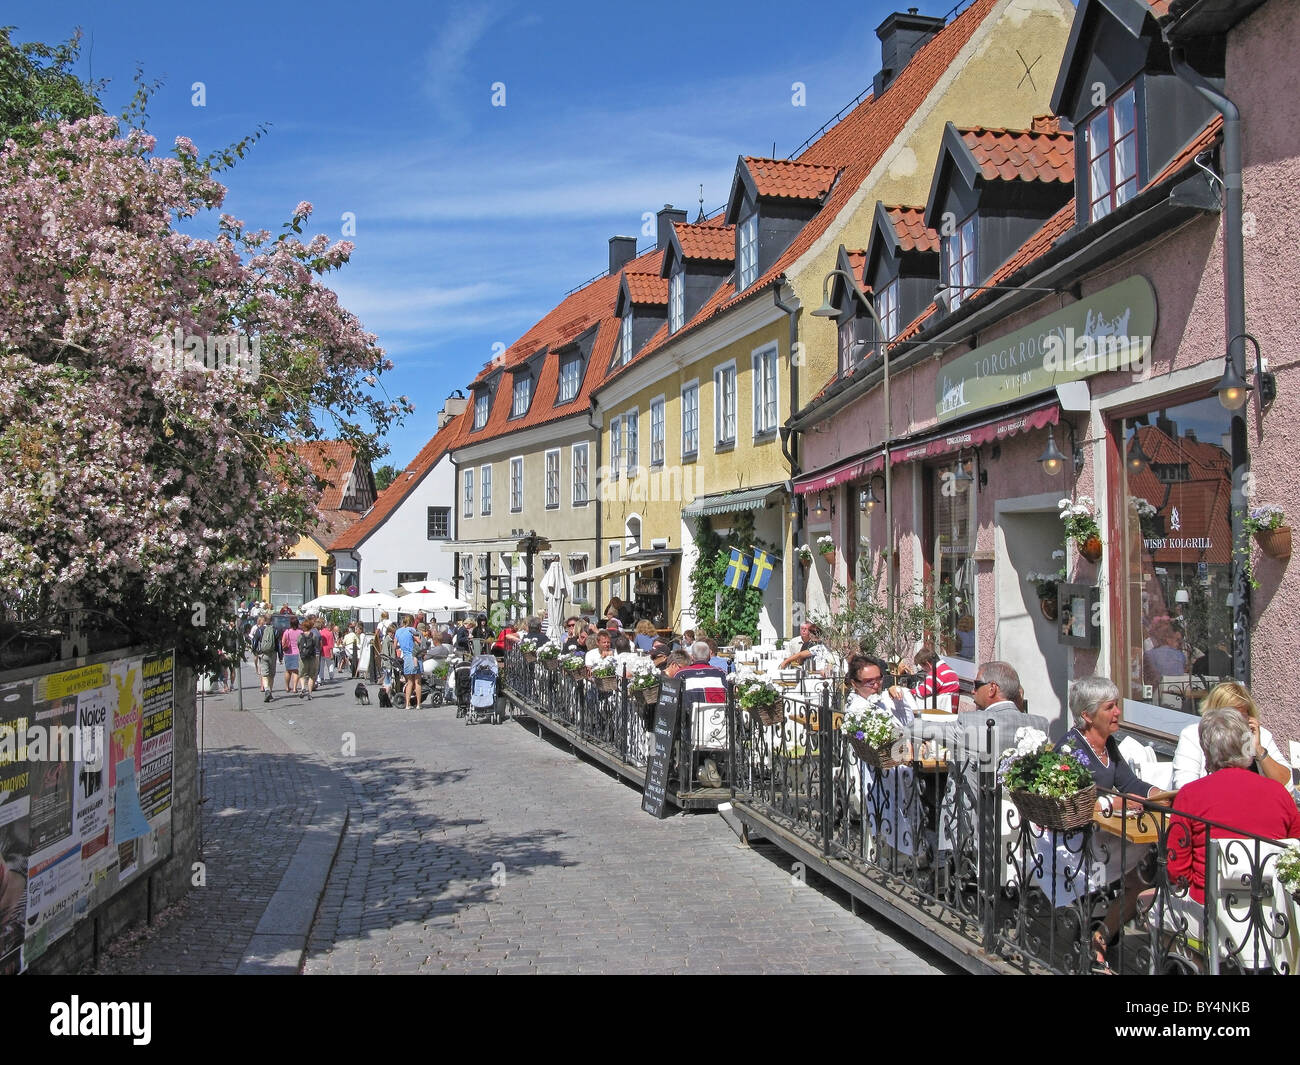 Pavement cafes, restaurants and old buildings, Visby, Gotland, Sweden. Stock Photo